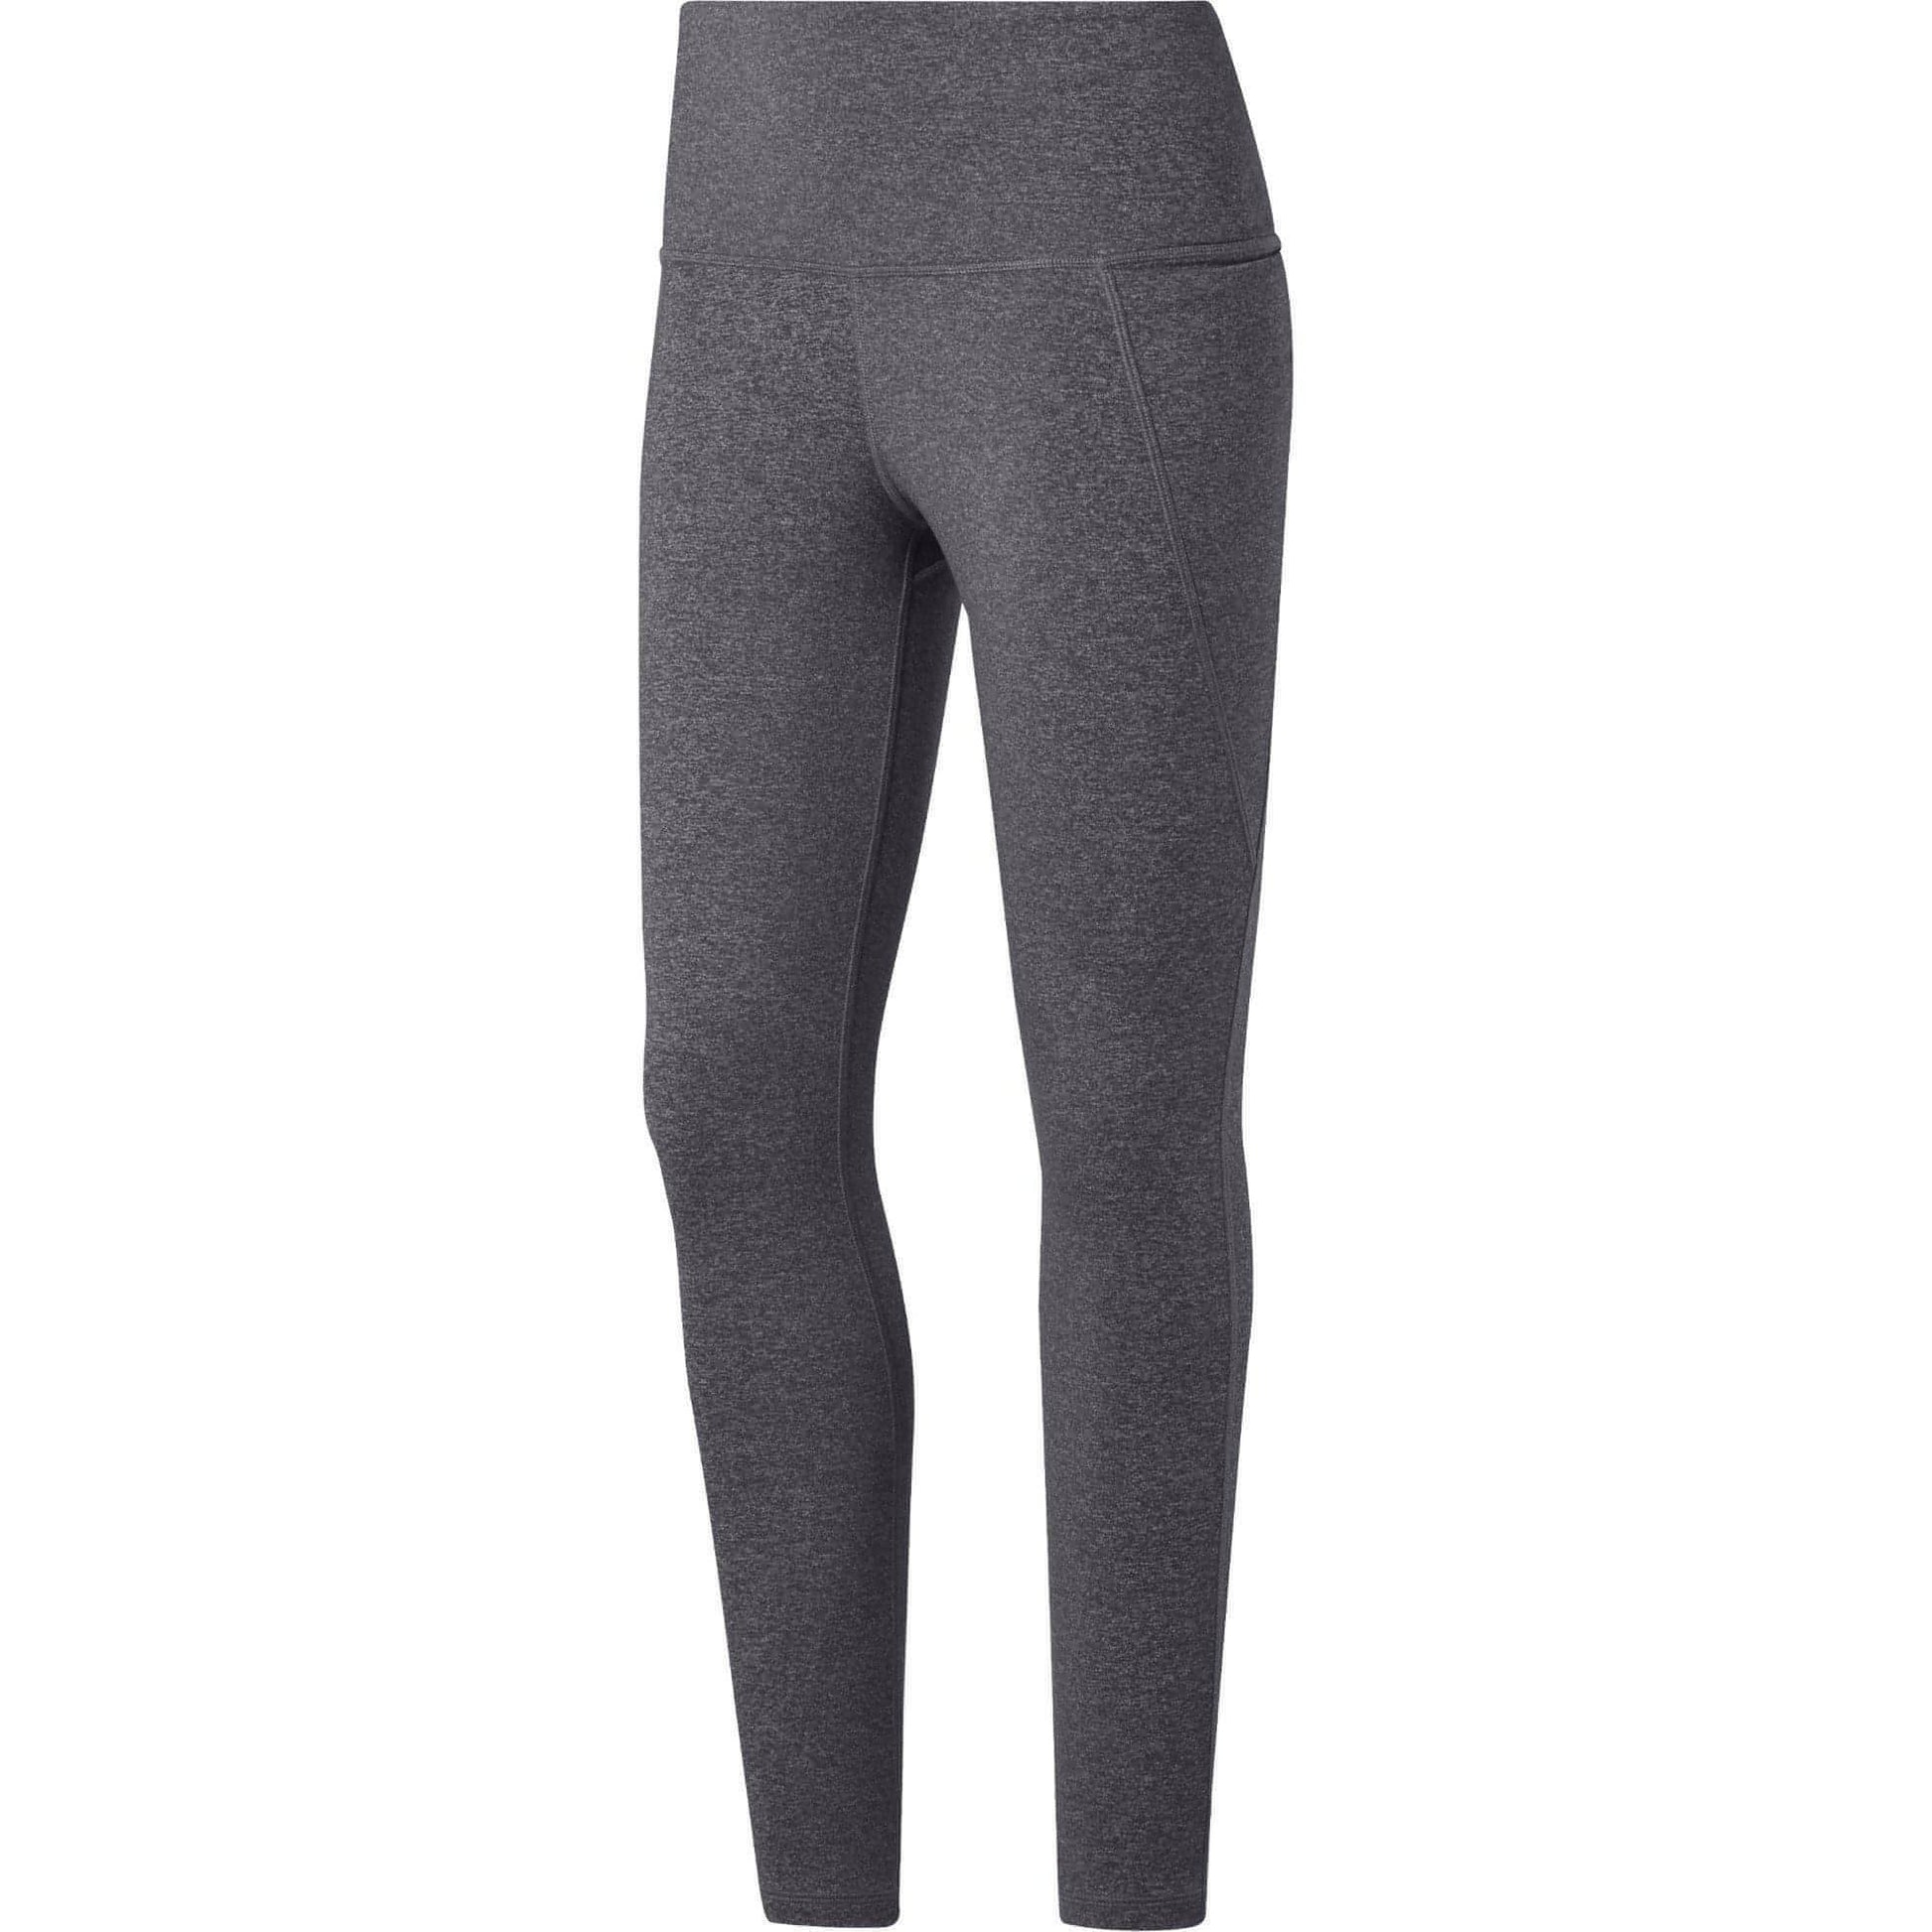 LDZYXY Grey Leggings for Women UK Leggings with Pockets Workout